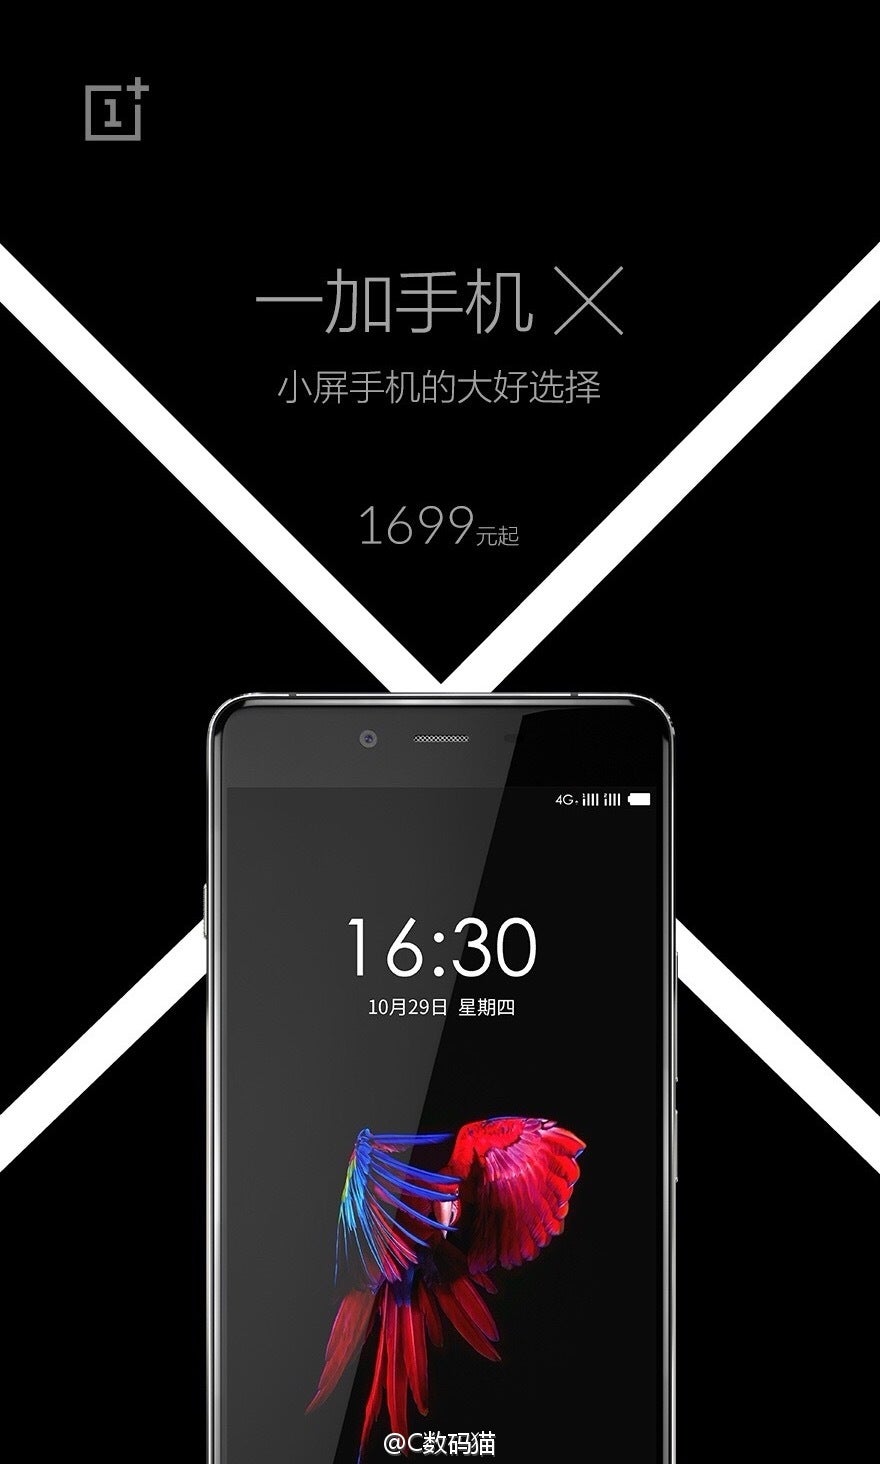 Alleged OnePlus X event poster leak reveals the eventual design and price tag